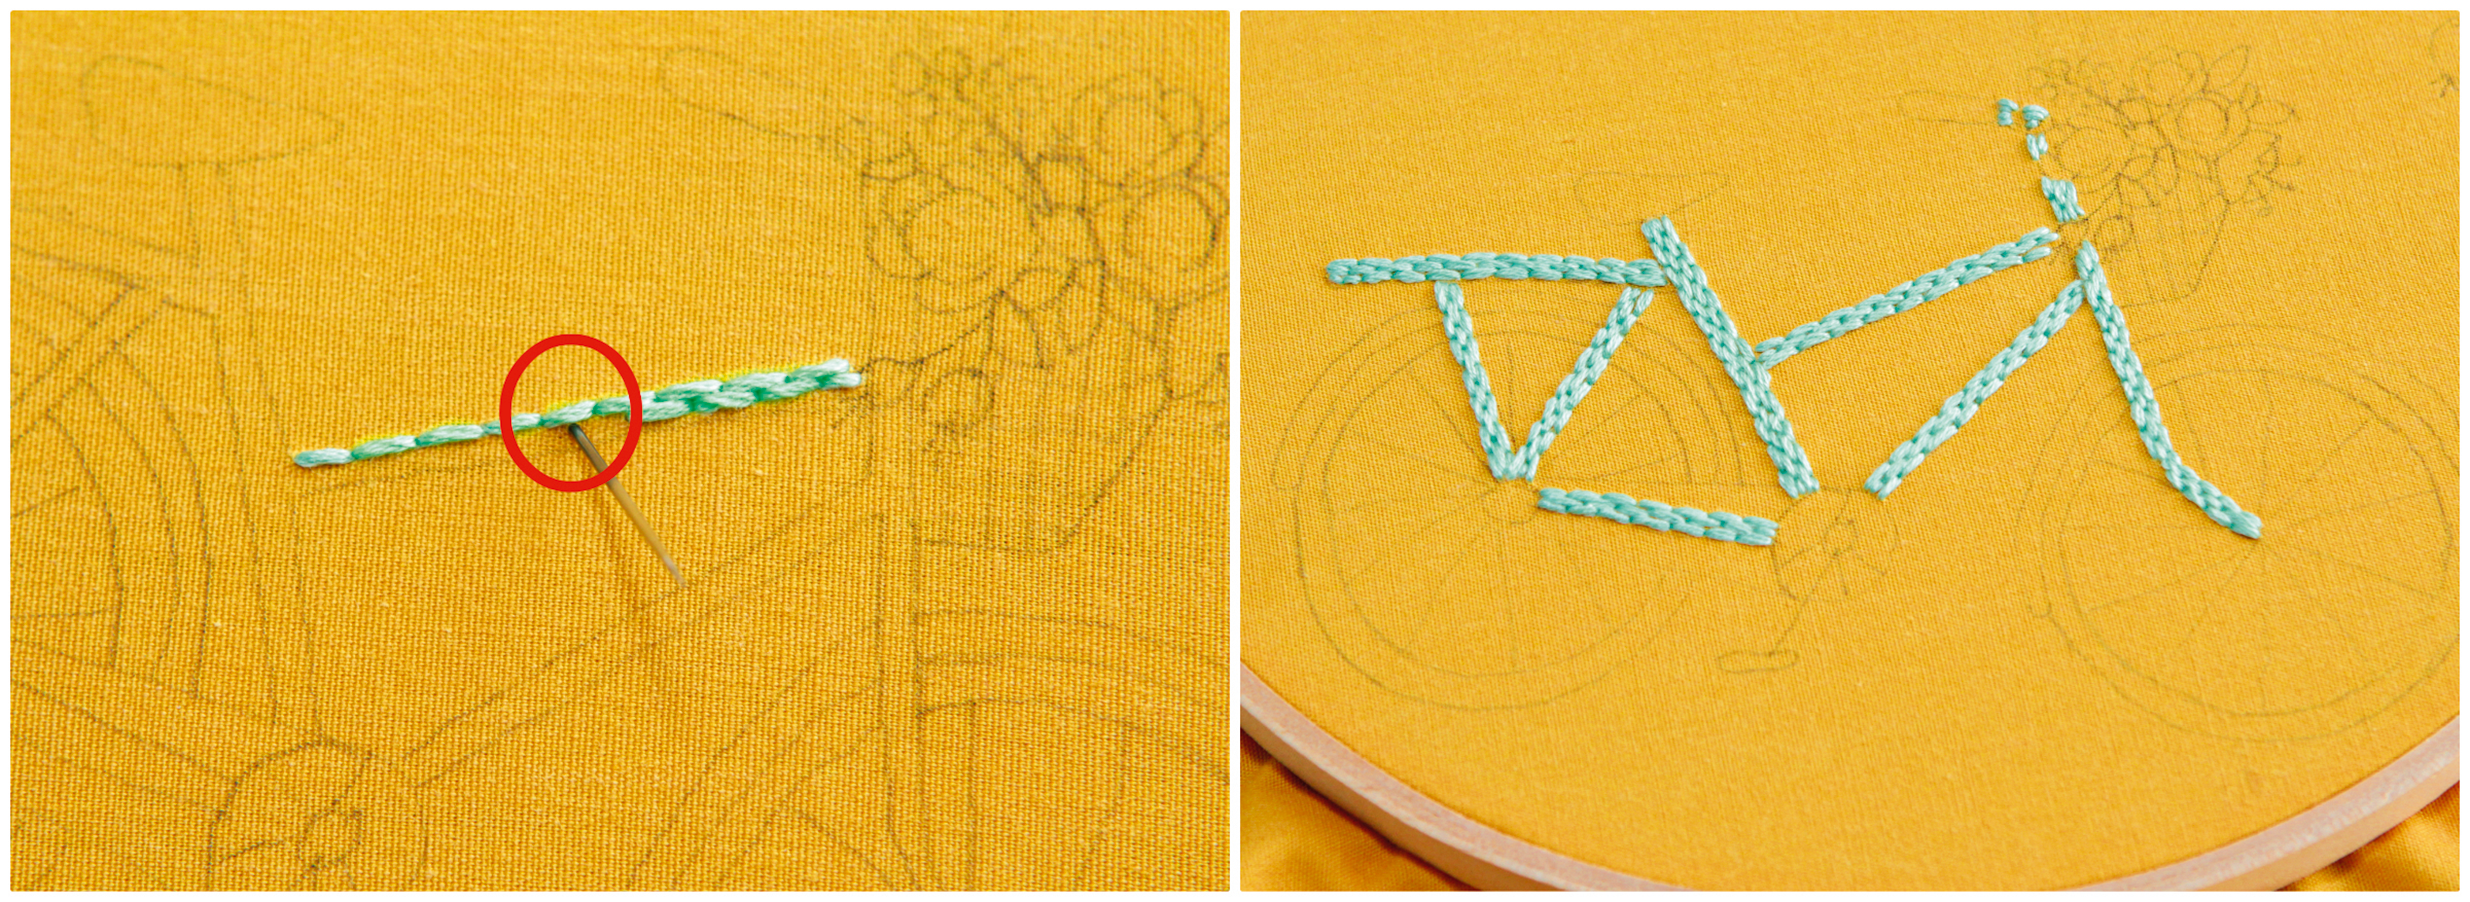 bicycle embroidery pattern step 3